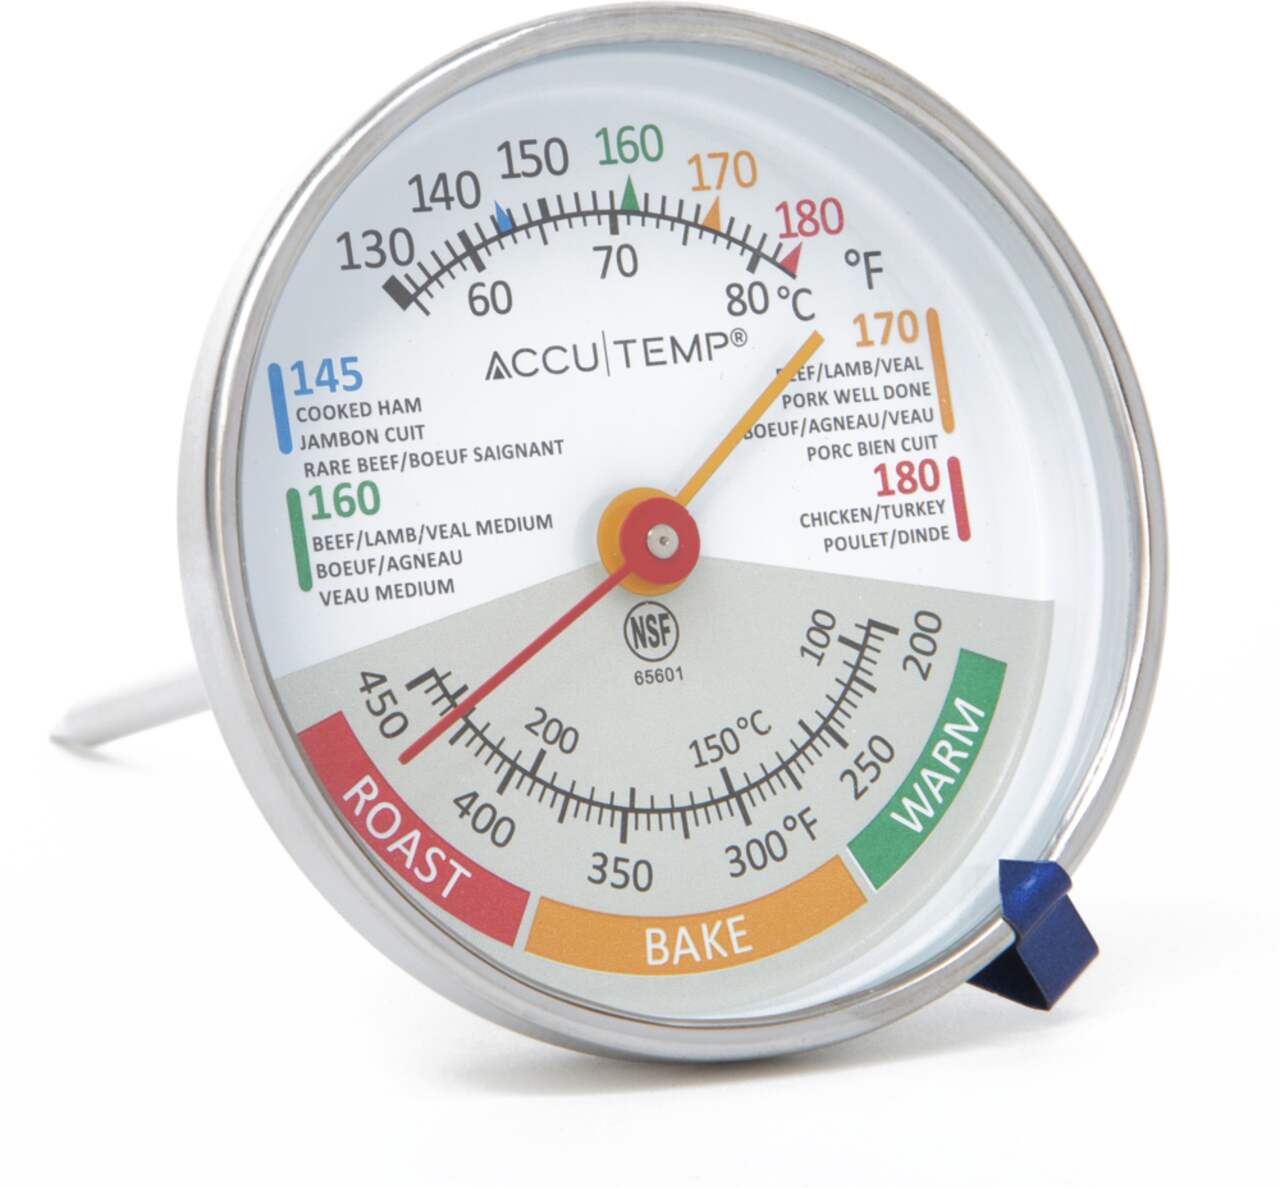 https://media-www.canadiantire.ca/product/living/kitchen/kitchen-tools-thermometers/1422475/accutemp-meat-and-oven-thermometer--68127125-74da-49f4-94c0-dafd83ca518d.png?imdensity=1&imwidth=640&impolicy=mZoom